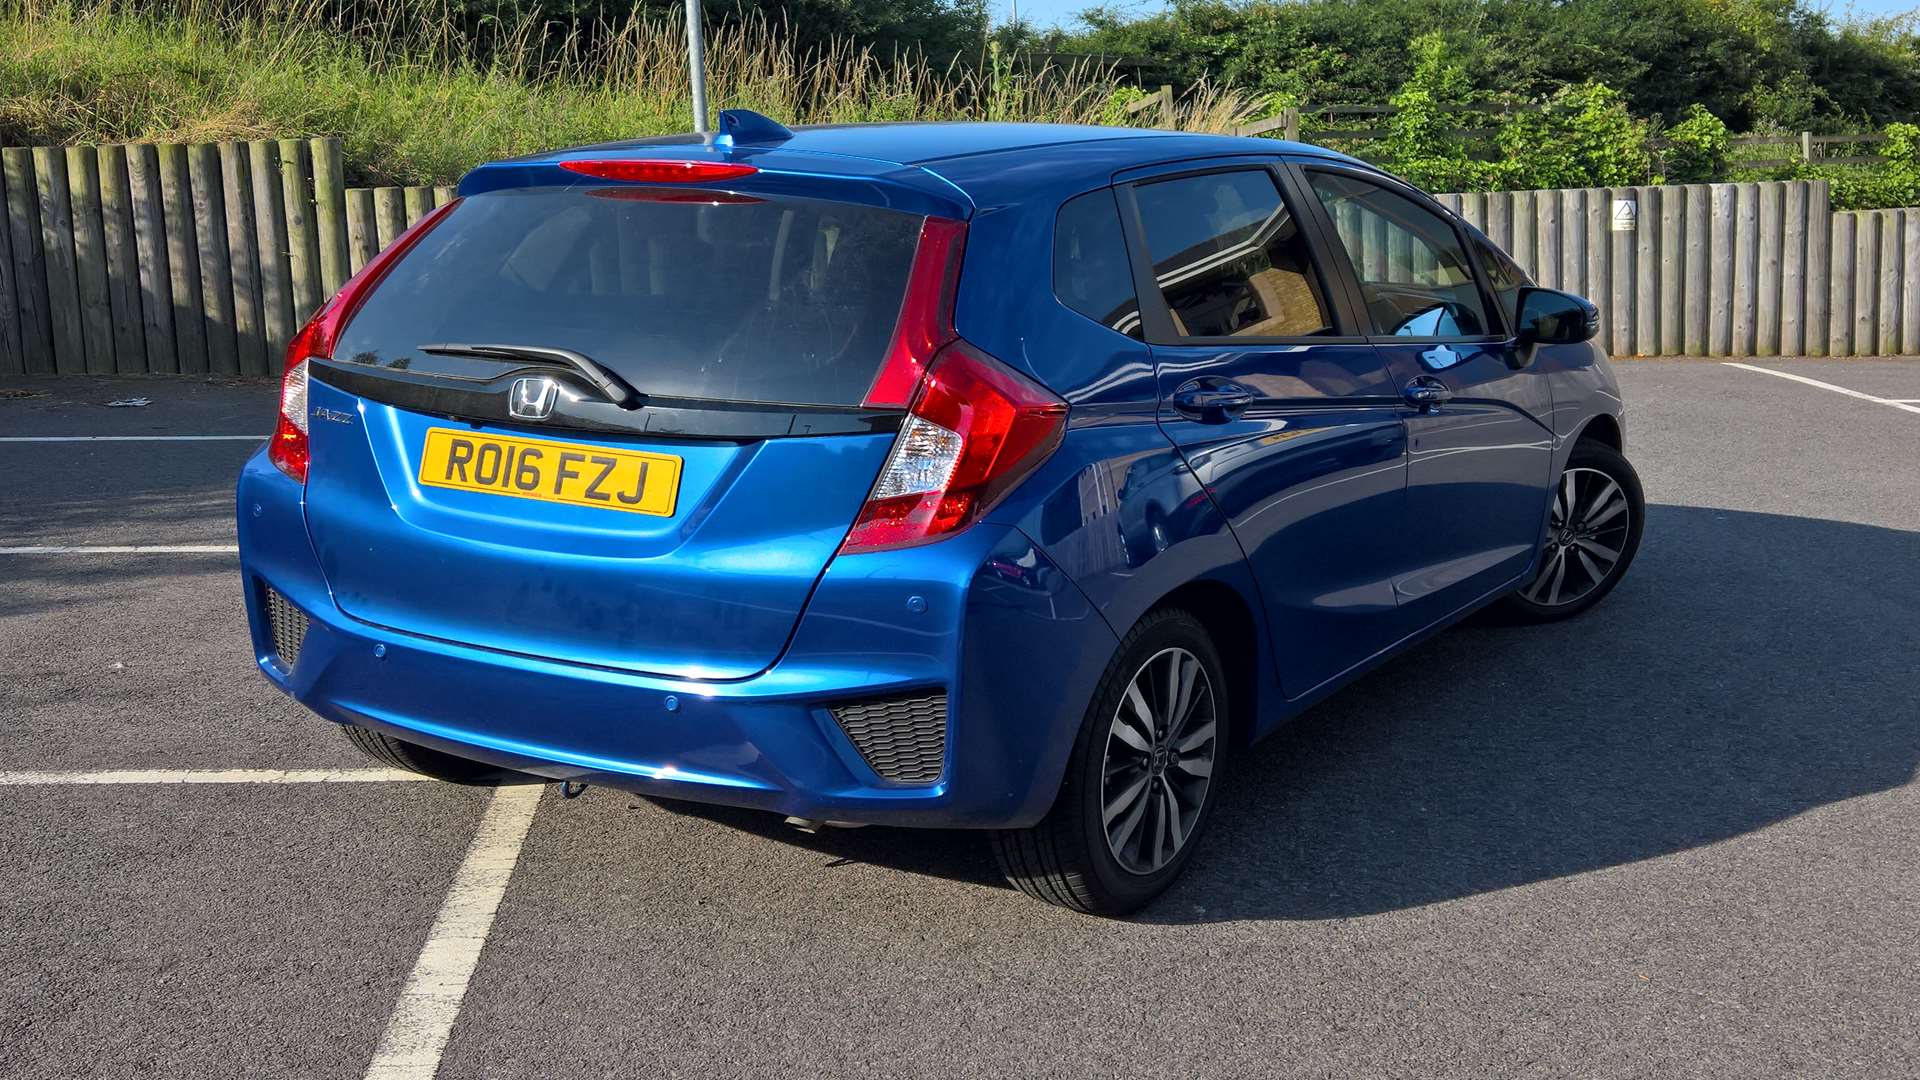 Honda is hoping to attract younger buyers with the latest version of the Jazz